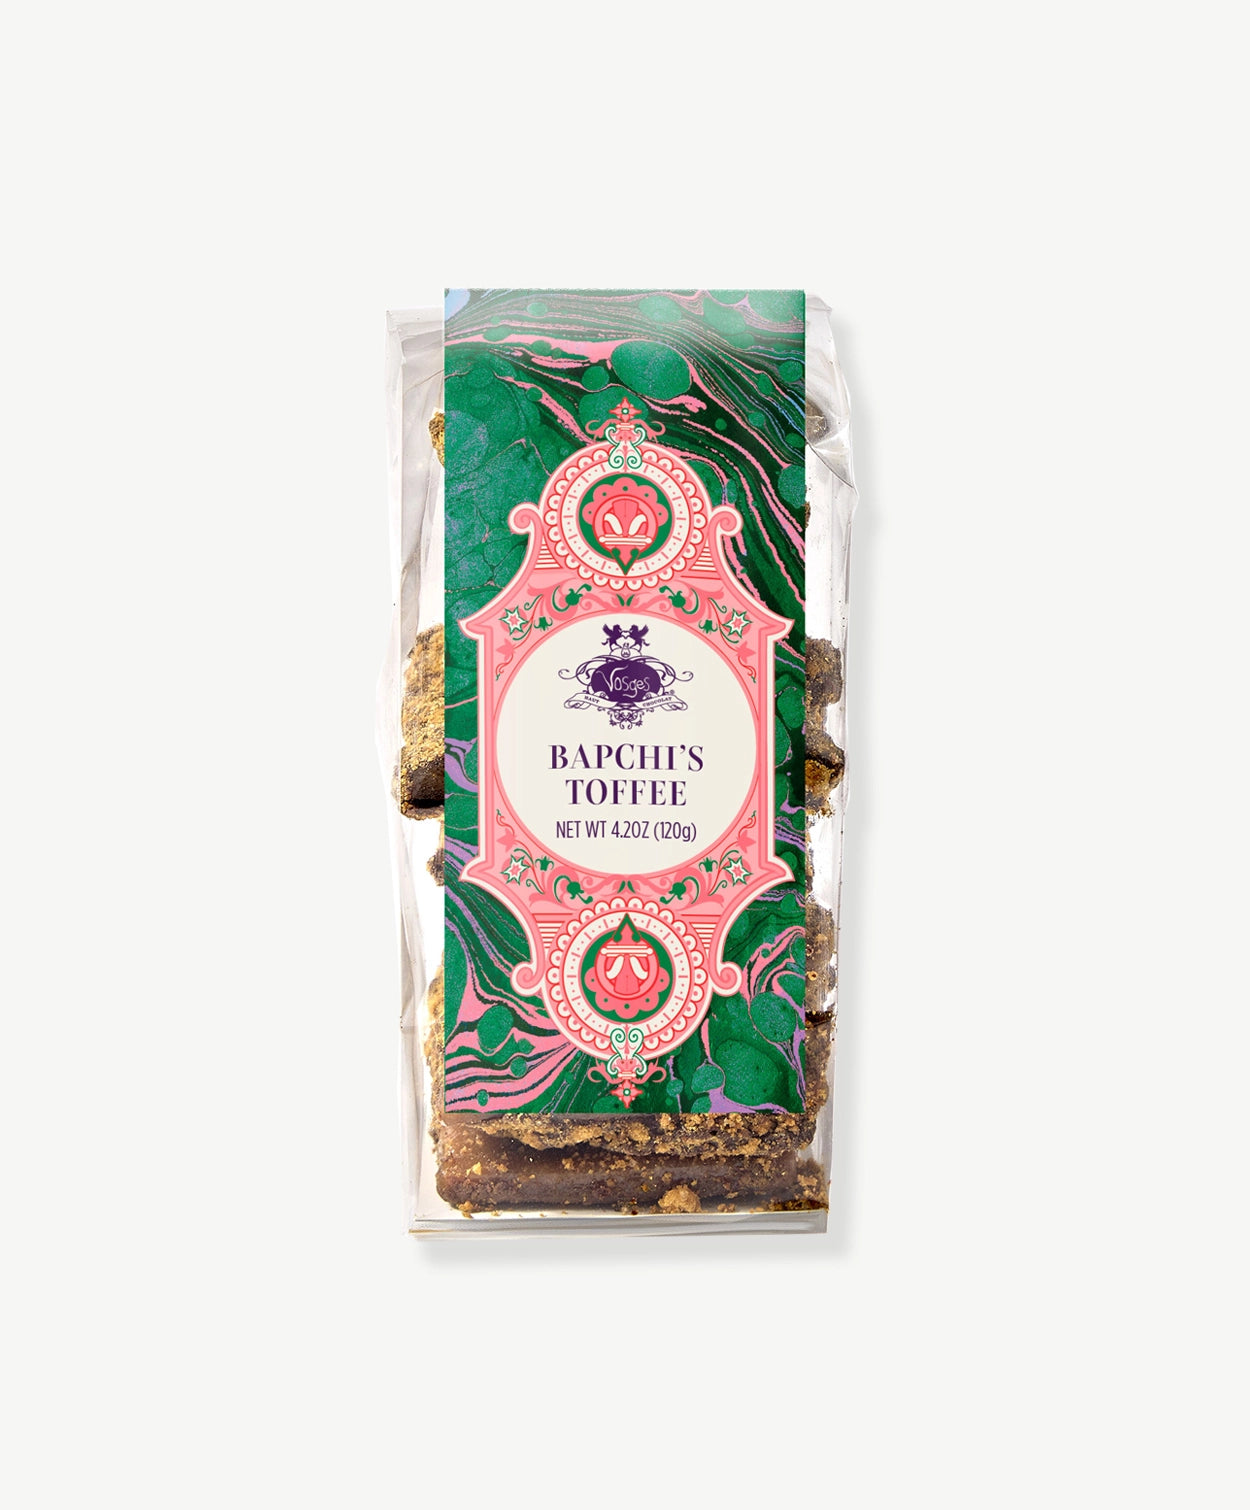 A clear bag of Caramel Toffee decorated with a green and pink label stands against a light grey background.